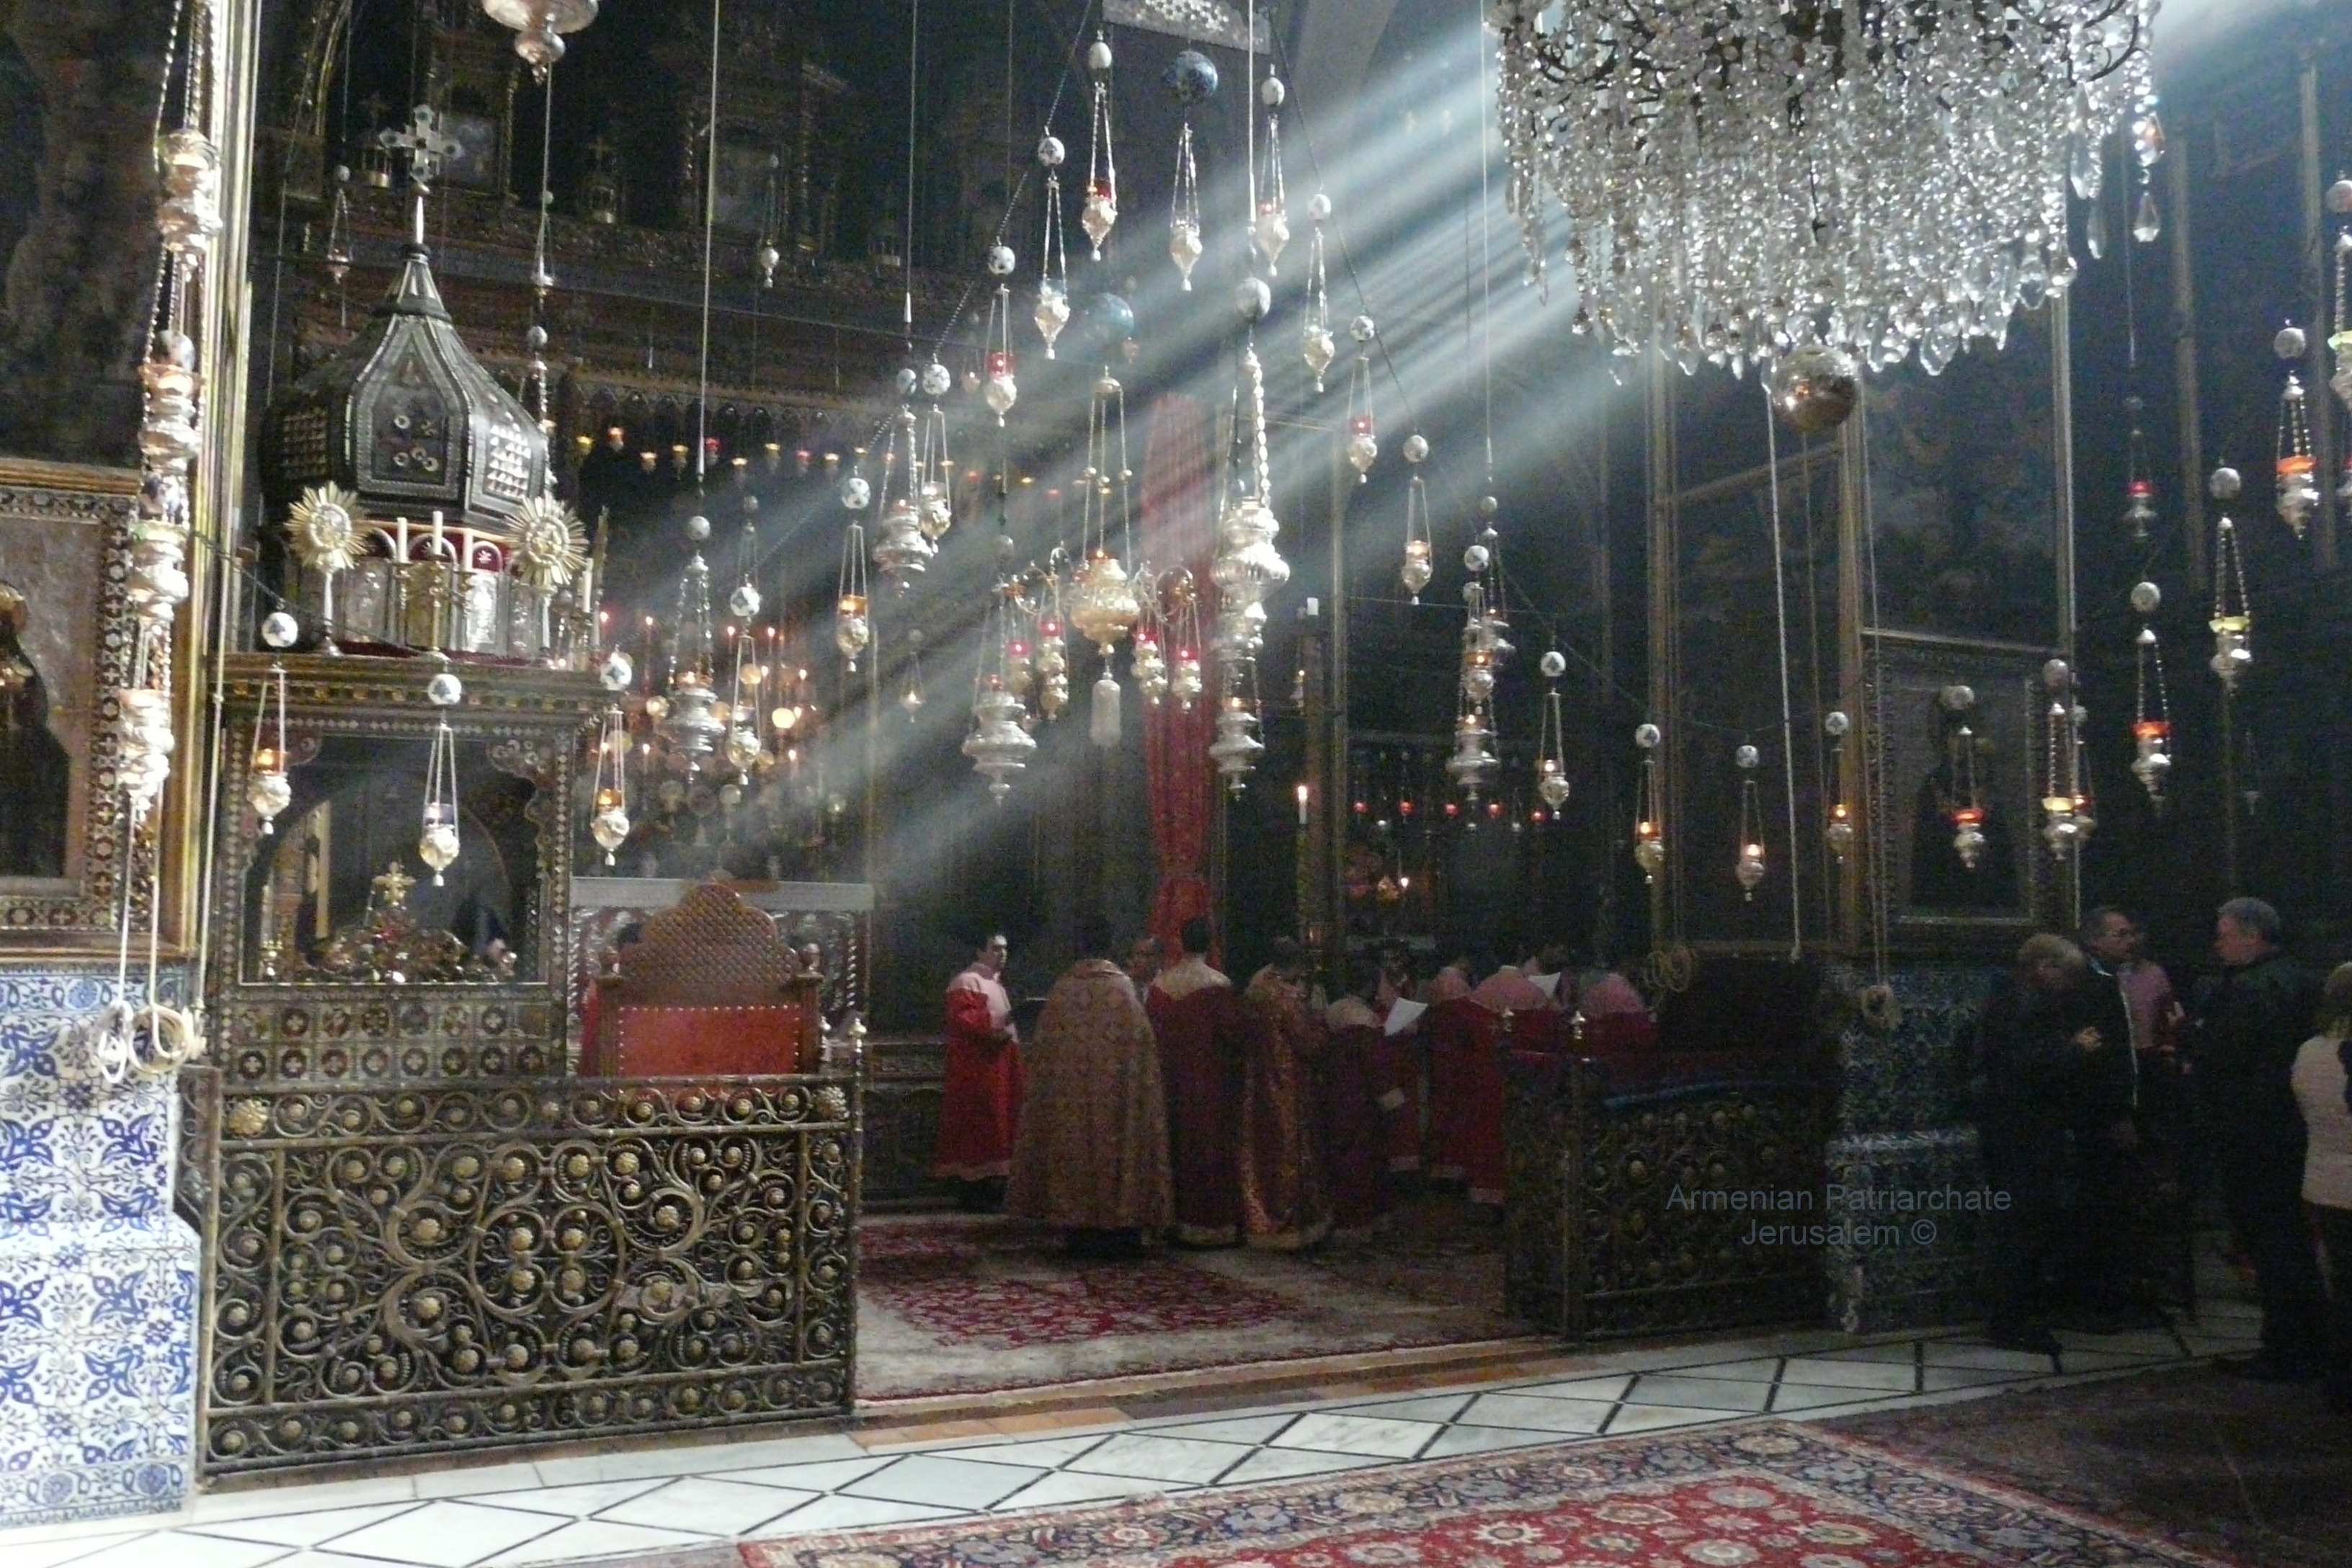 Feast day of the Armenian Patriarchate of Jerusalem – 2019